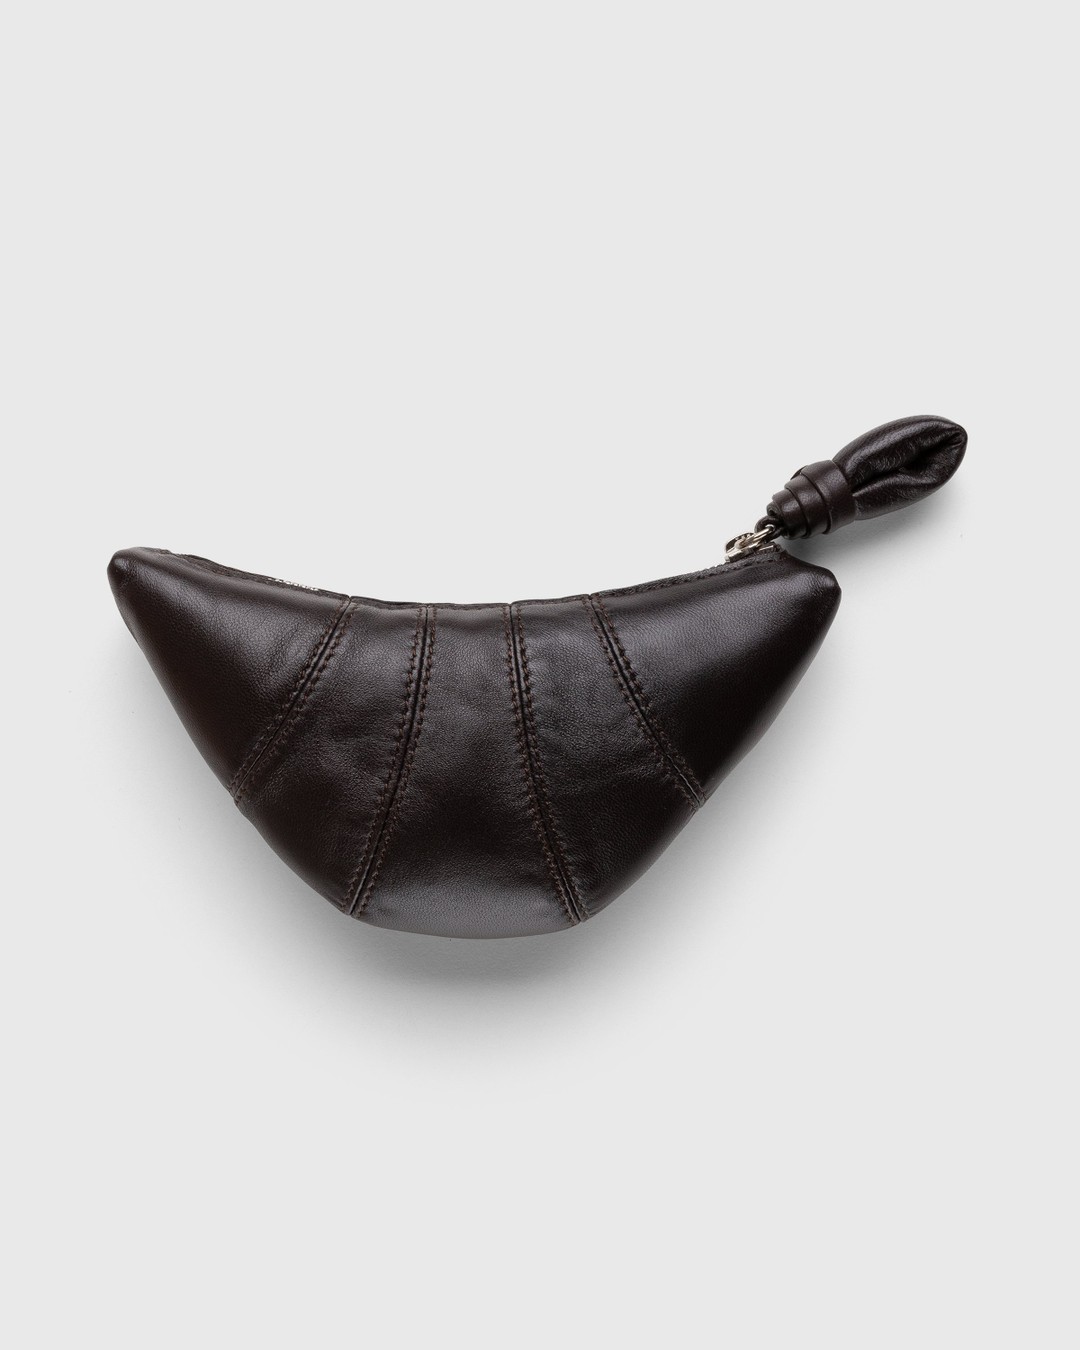 Lemaire x Highsnobiety – Not In Paris 4 Croissant Coin Purse Dark Chocolate - Wallets - Black - Image 2